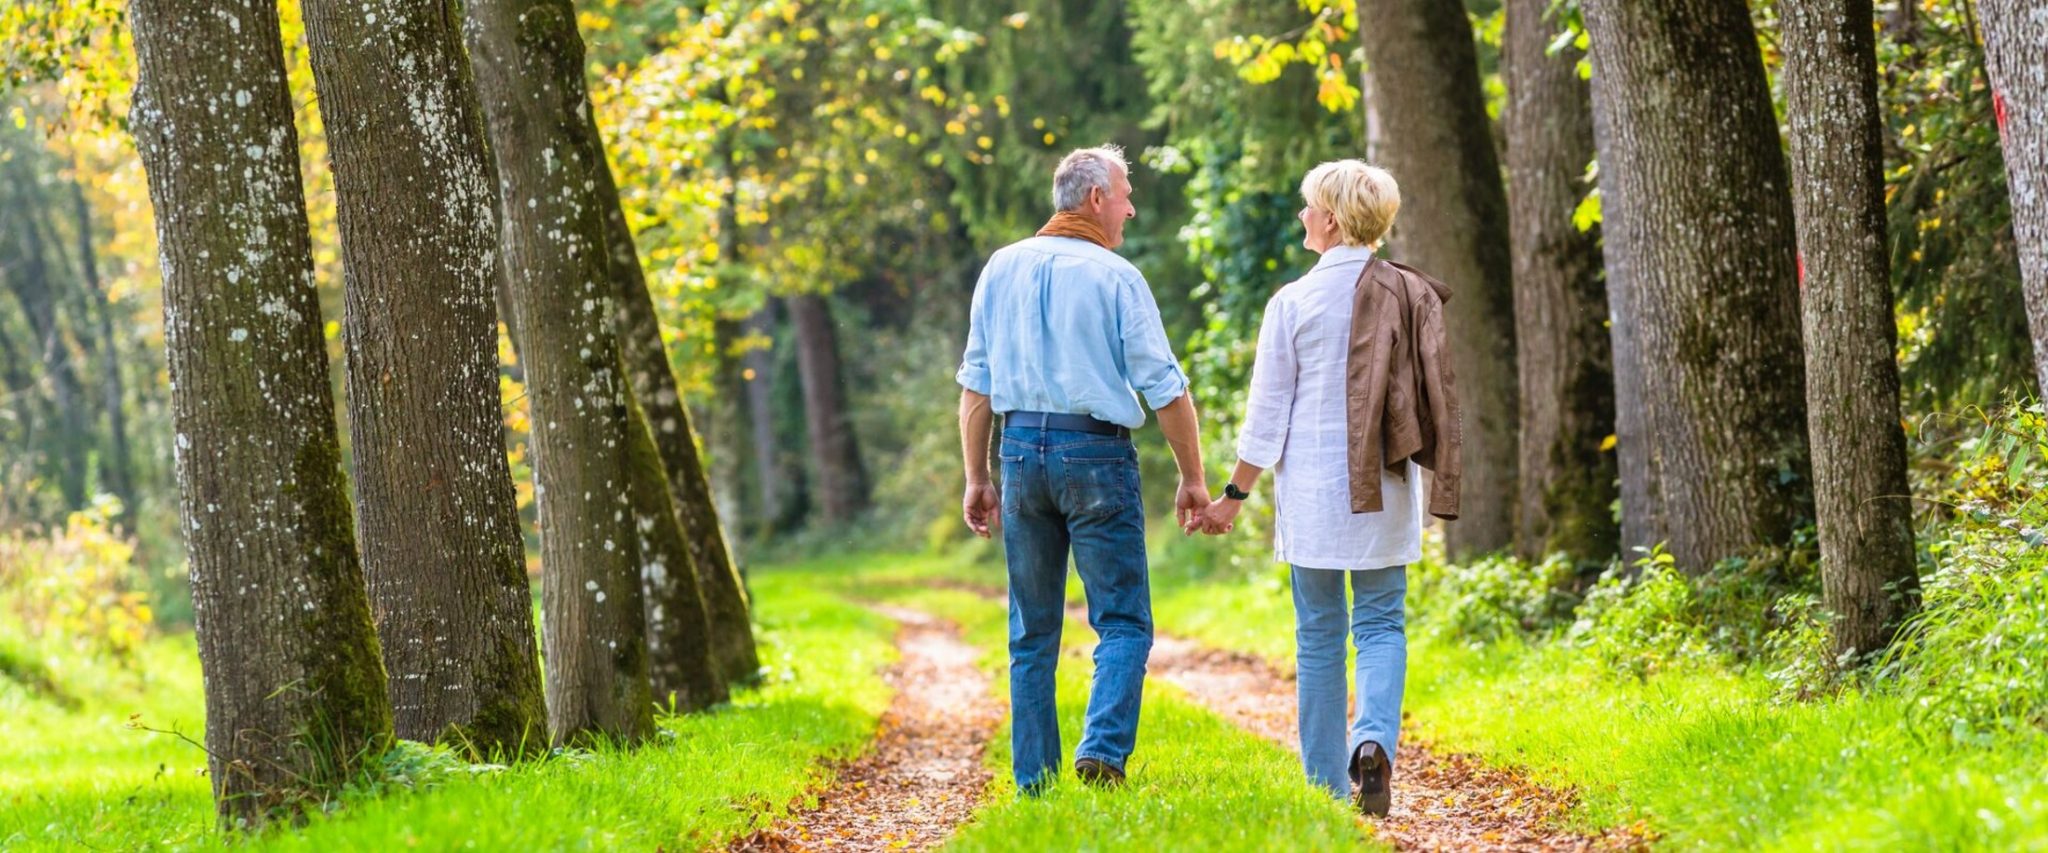 A senior couple holds hands while walking in nature together